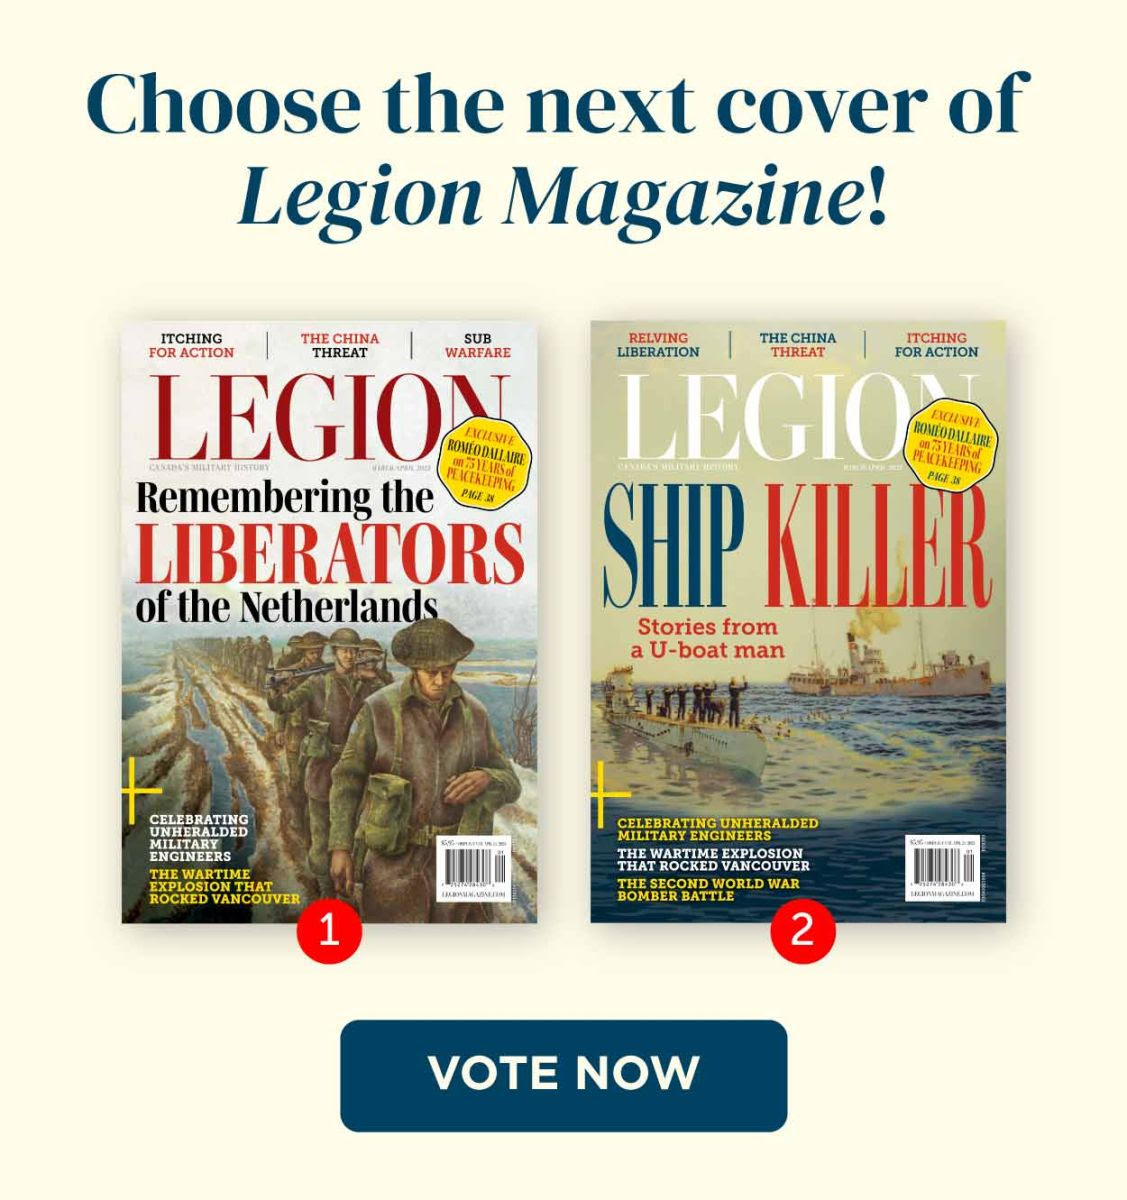 Choose our cover